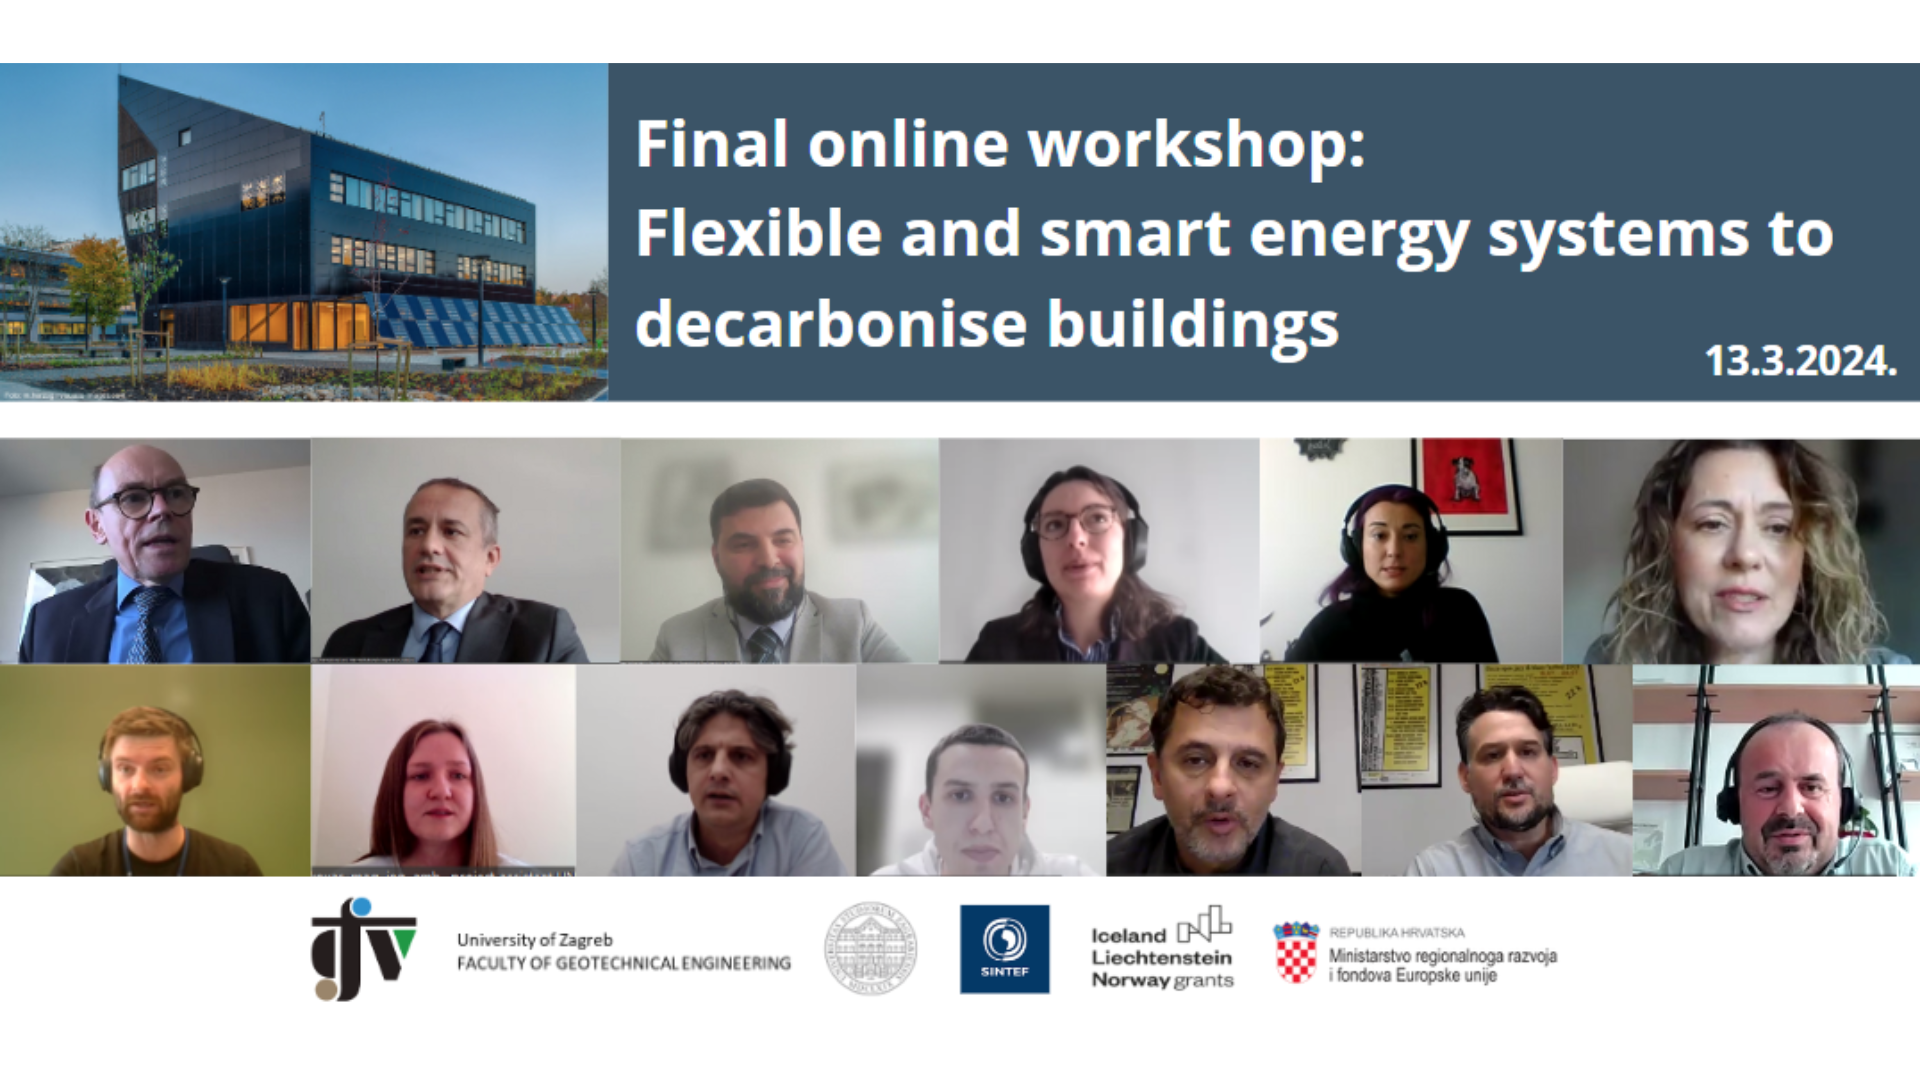 Online final workshop held within the project: Flexible and smart energy systems to decarbonize buildings